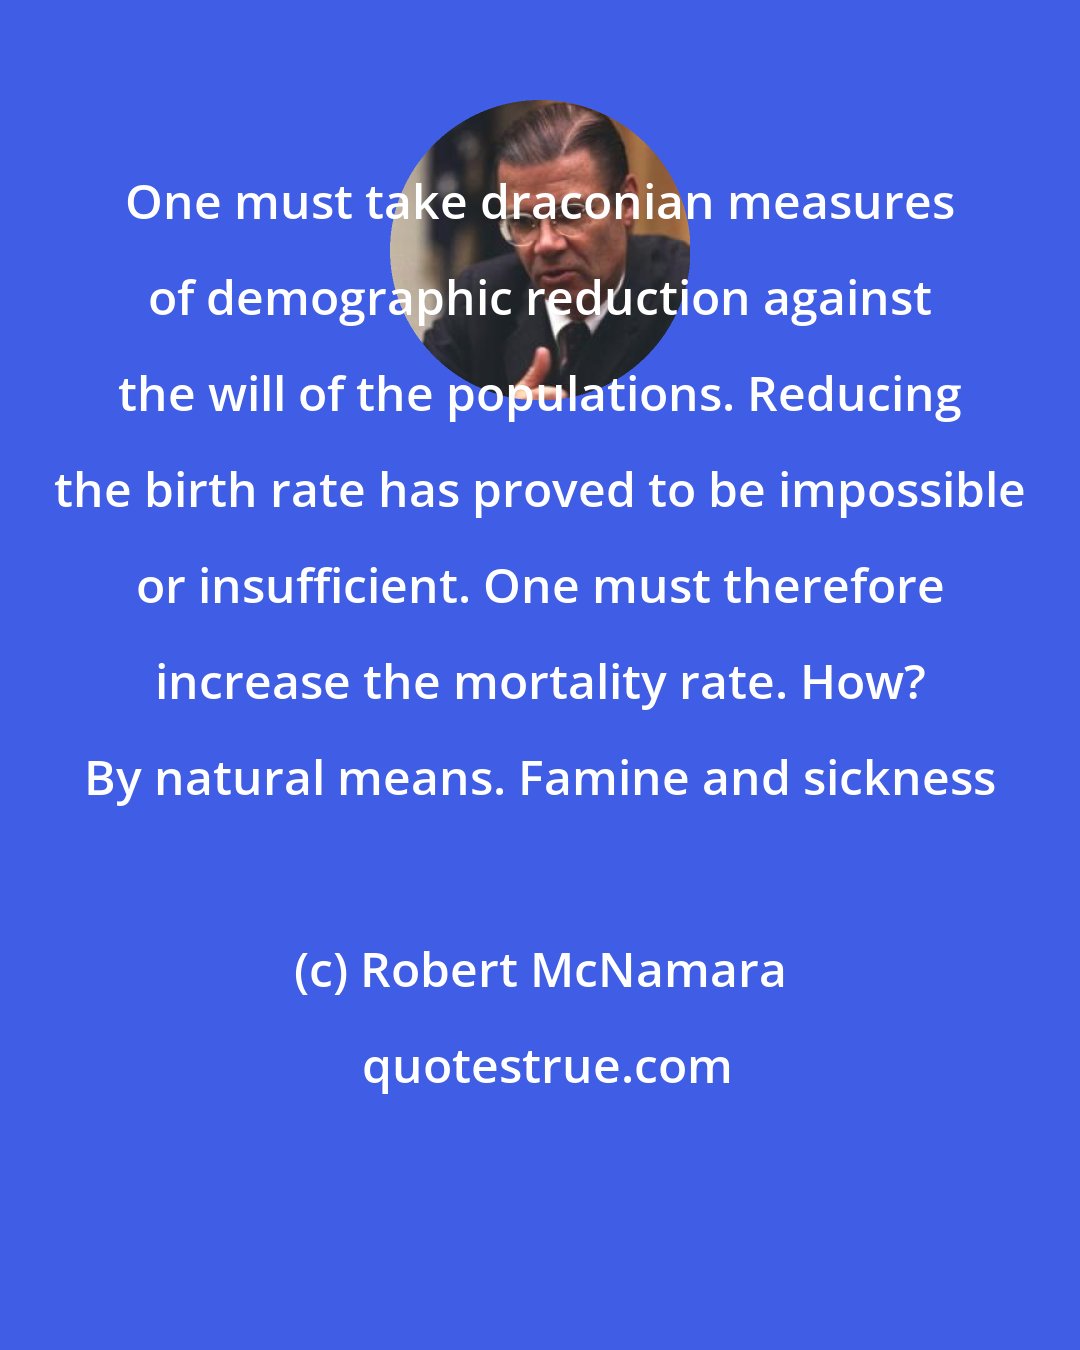 Robert McNamara: One must take draconian measures of demographic reduction against the will of the populations. Reducing the birth rate has proved to be impossible or insufficient. One must therefore increase the mortality rate. How? By natural means. Famine and sickness